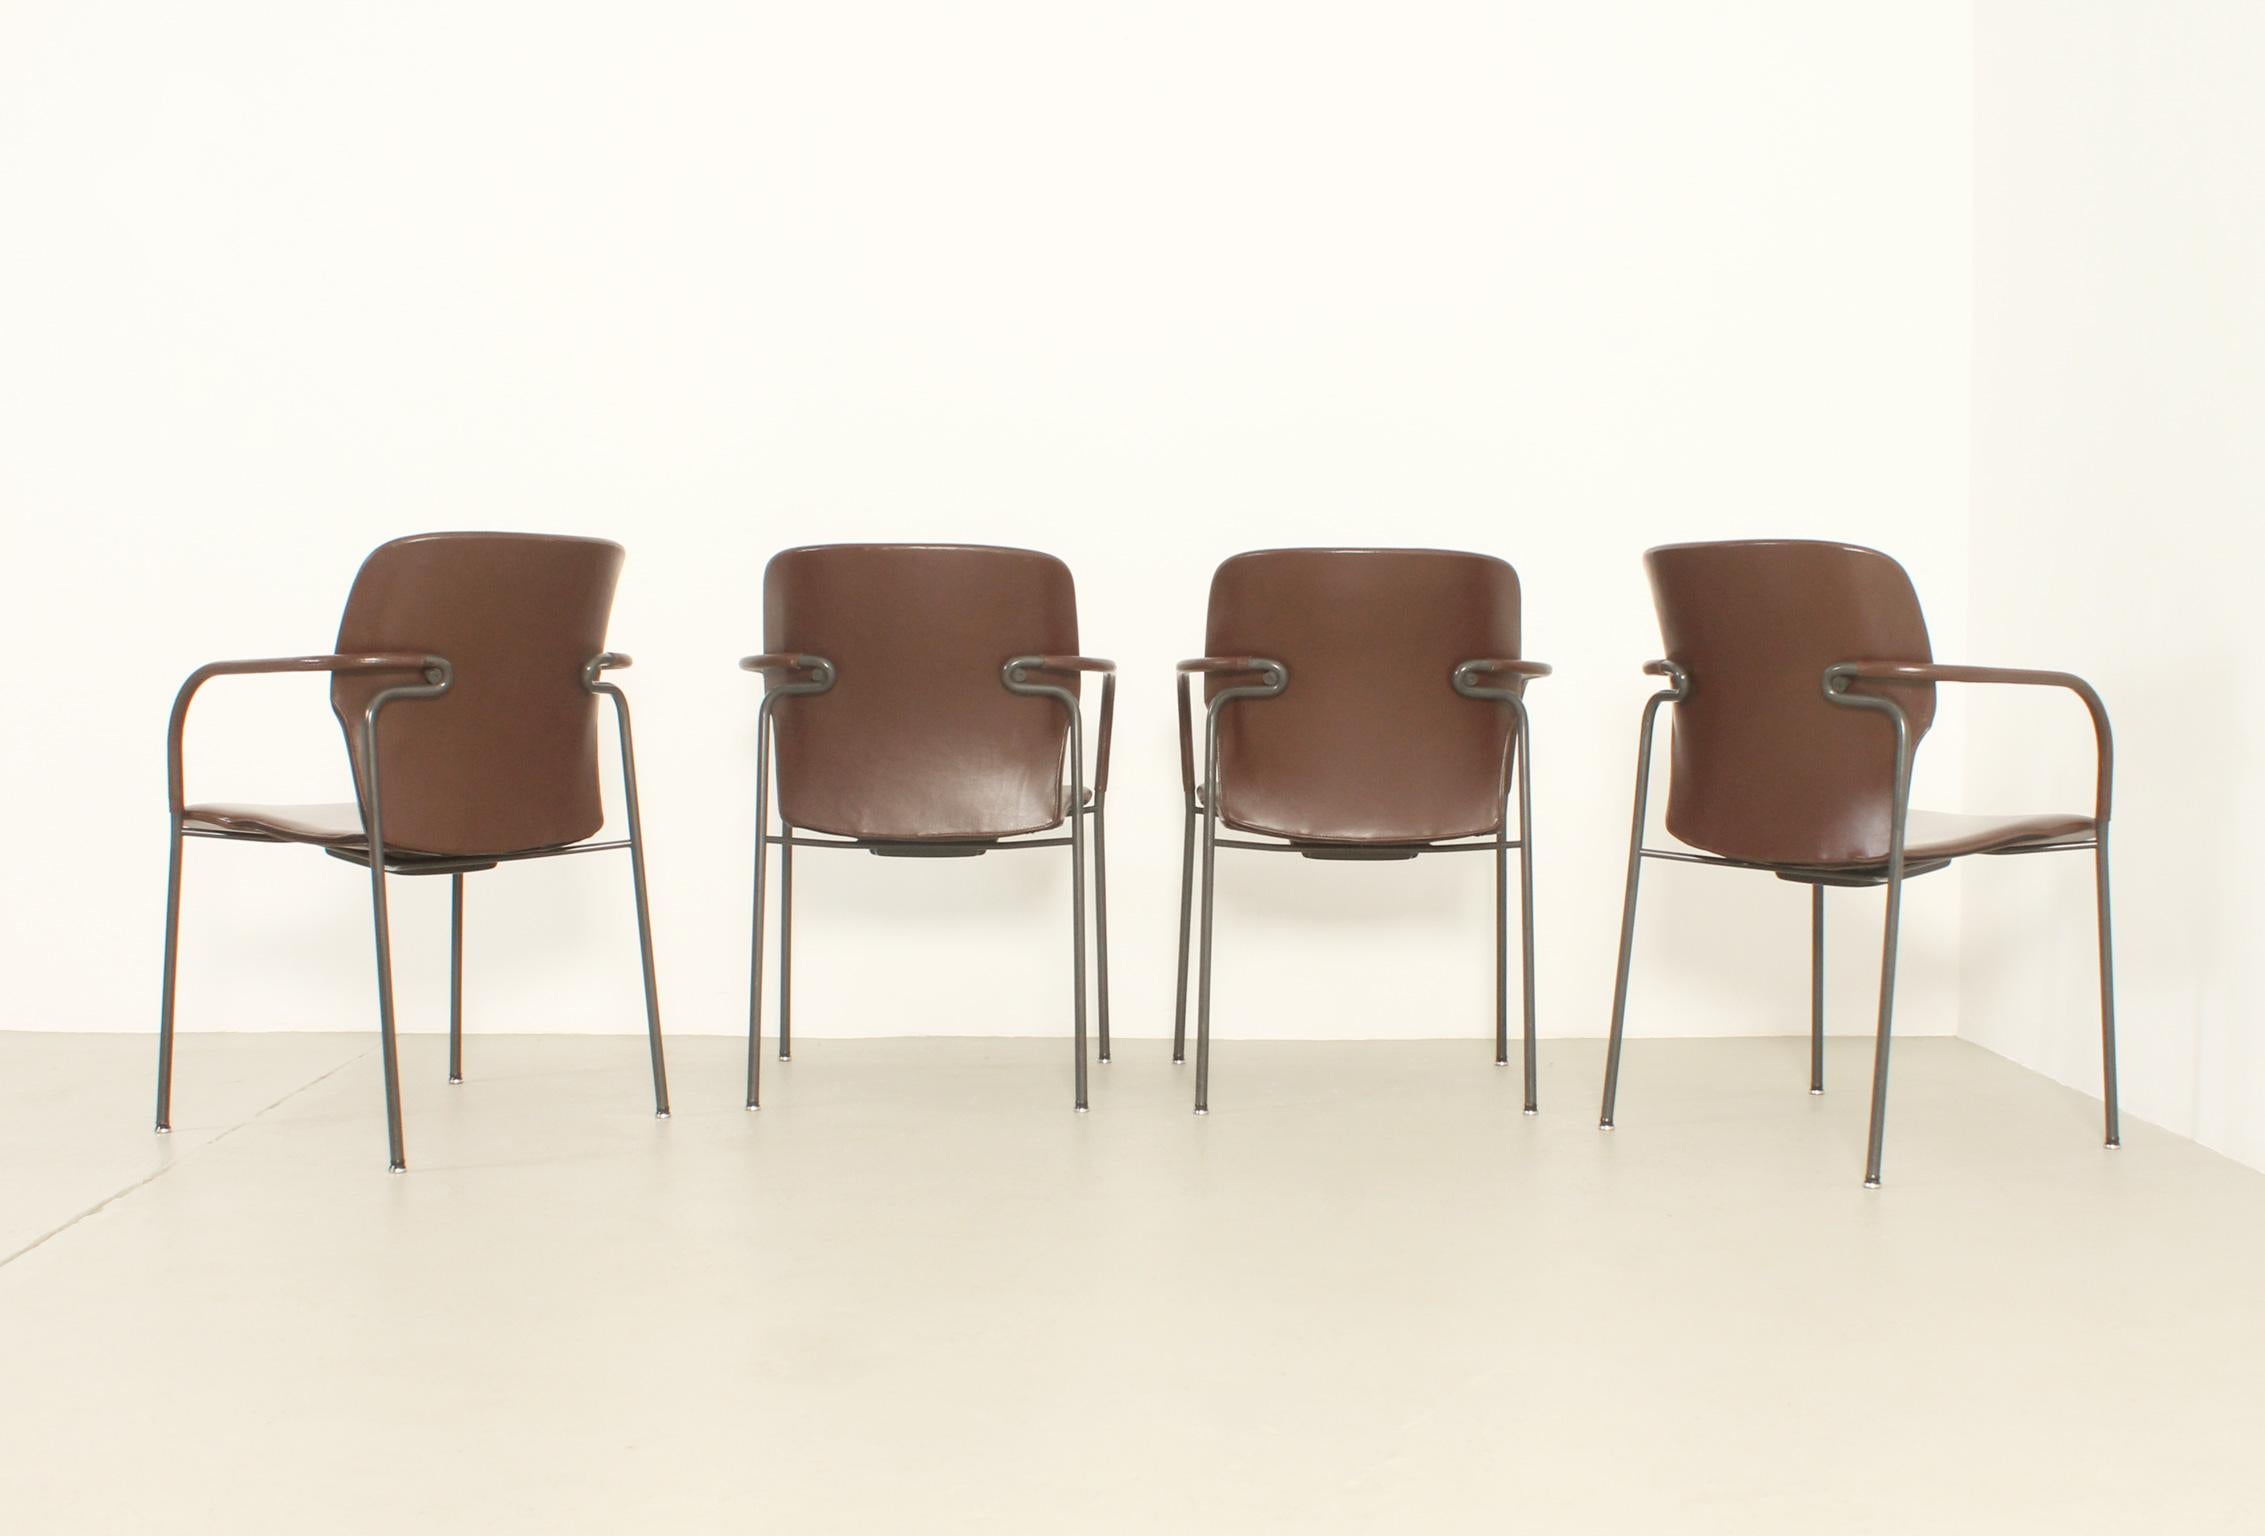 Four Leather Lalanda Chairs by Gianfranco Frattini, 1980's For Sale 9